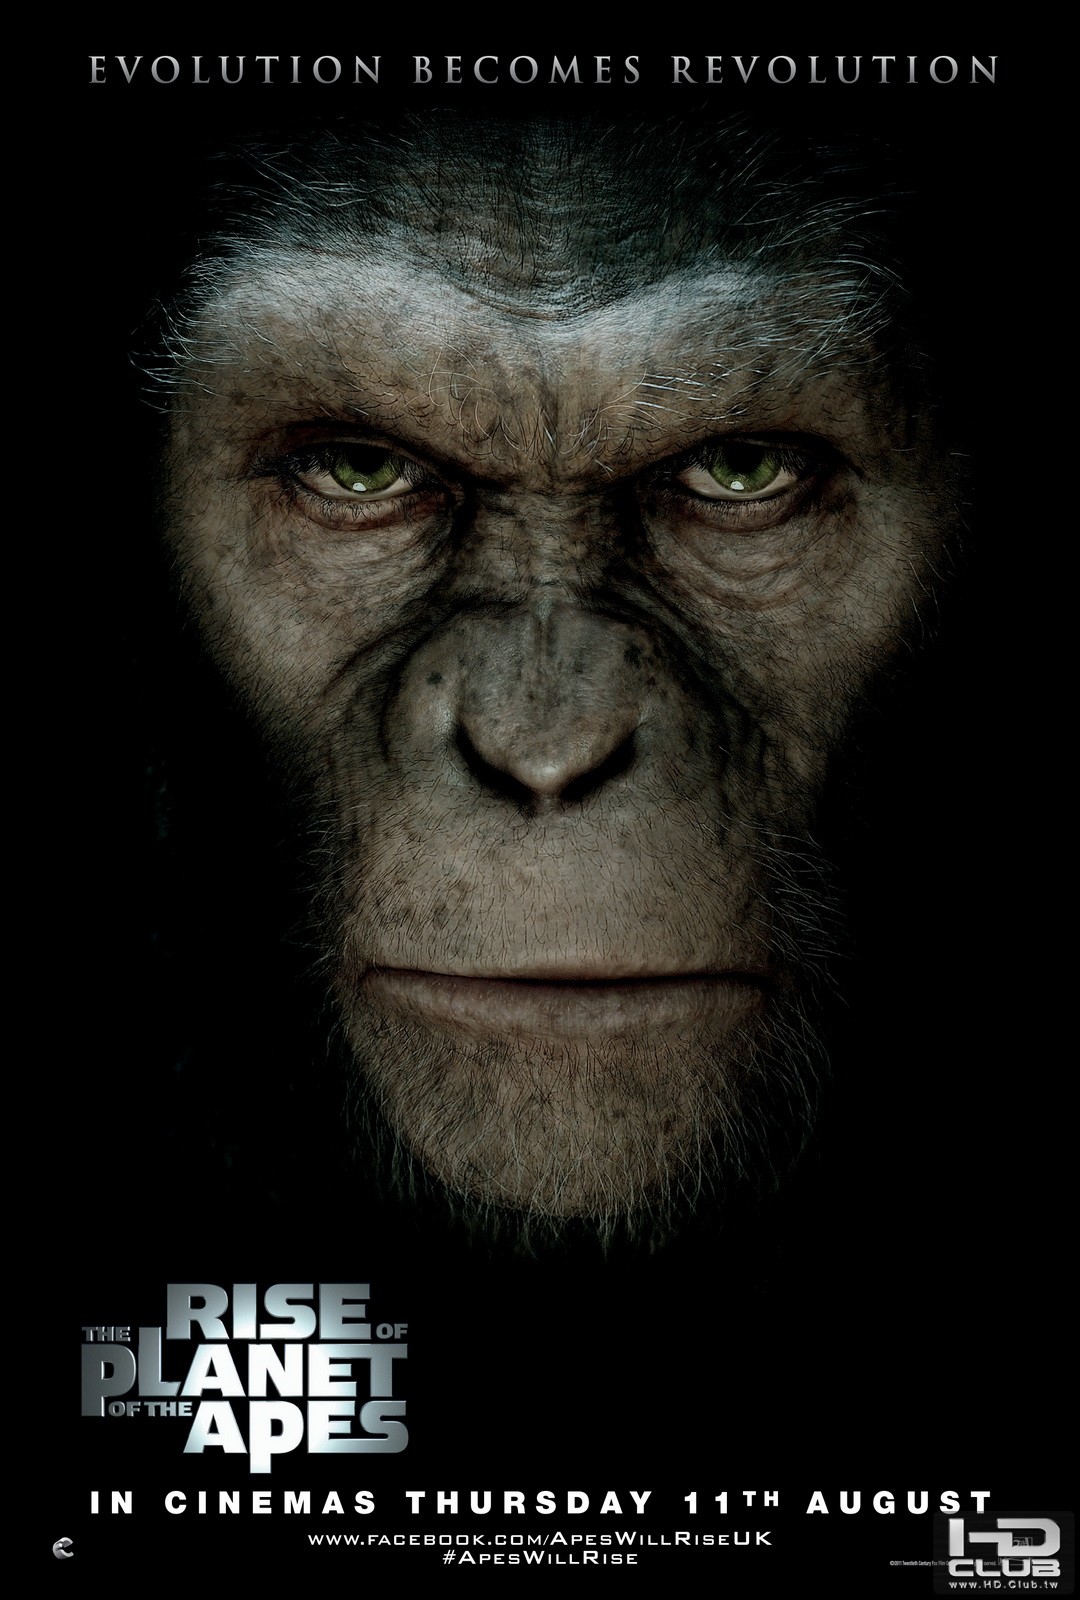 new-rise-of-the-planet-of-the-apes-poster.jpg